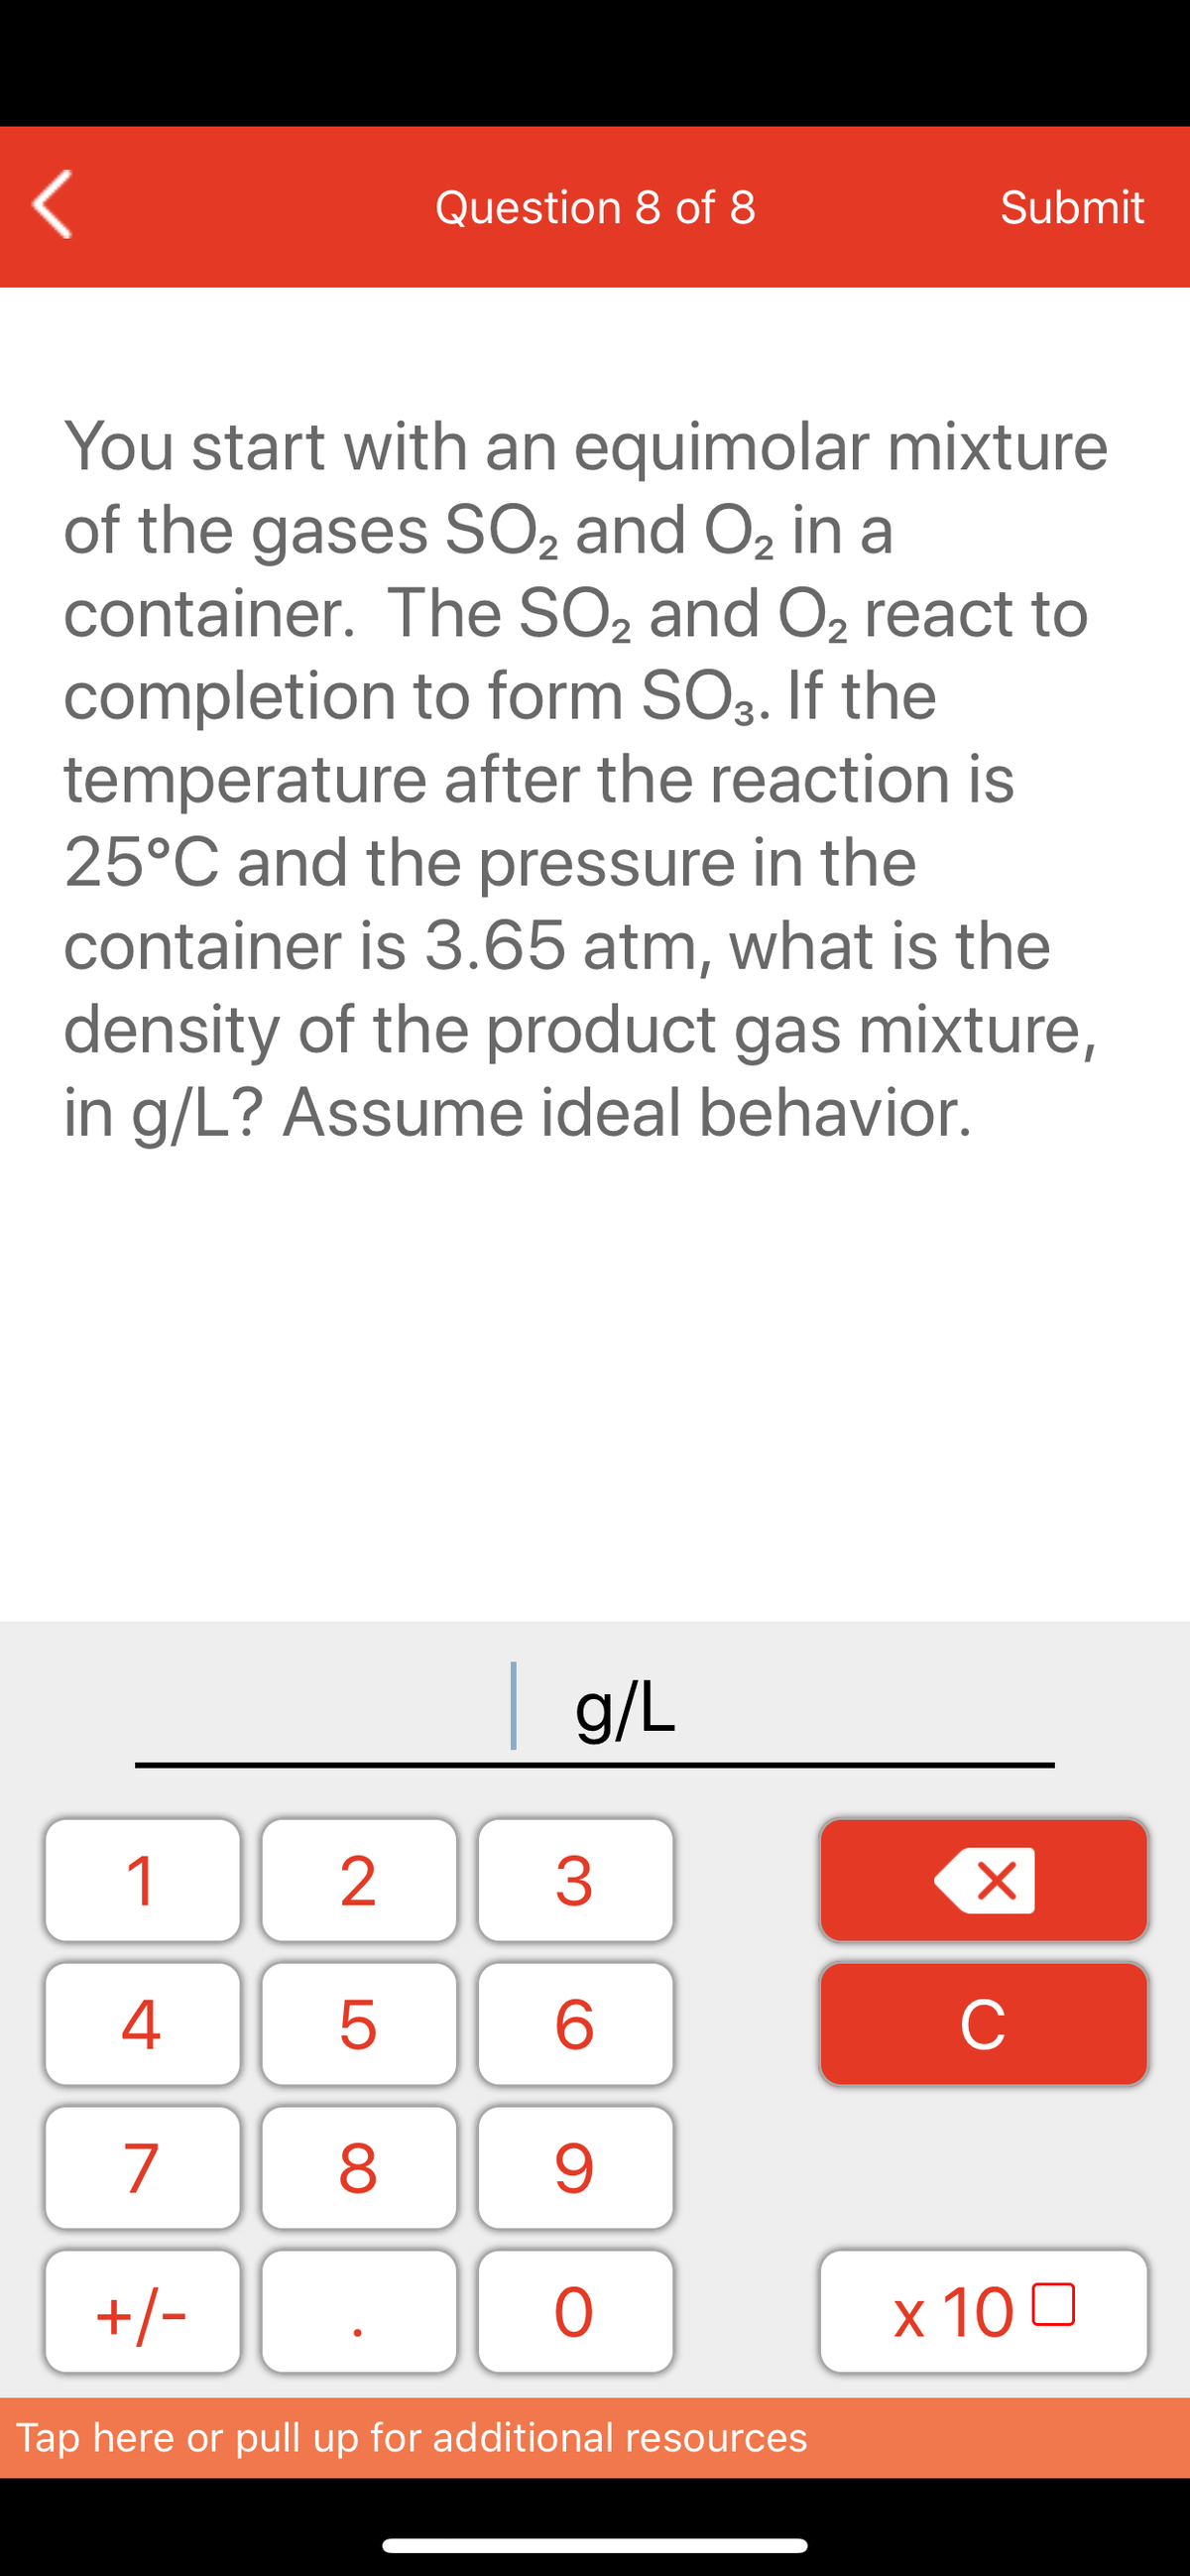 Question 8 of 8
Submit
You start with an equimolar mixture
of the gases SO2 and O2 in a
container. The SO2 and O2 react to
completion to form SO3. If the
temperature after the reaction is
25°C and the pressure in the
container is 3.65 atm, what is the
density of the product gas mixture,
in g/L? Assume ideal behavior.
g/L
1
3
6
C
7
8
+/-
ㅇ
x 10 0
Tap here or pull up for additional resources
LO
